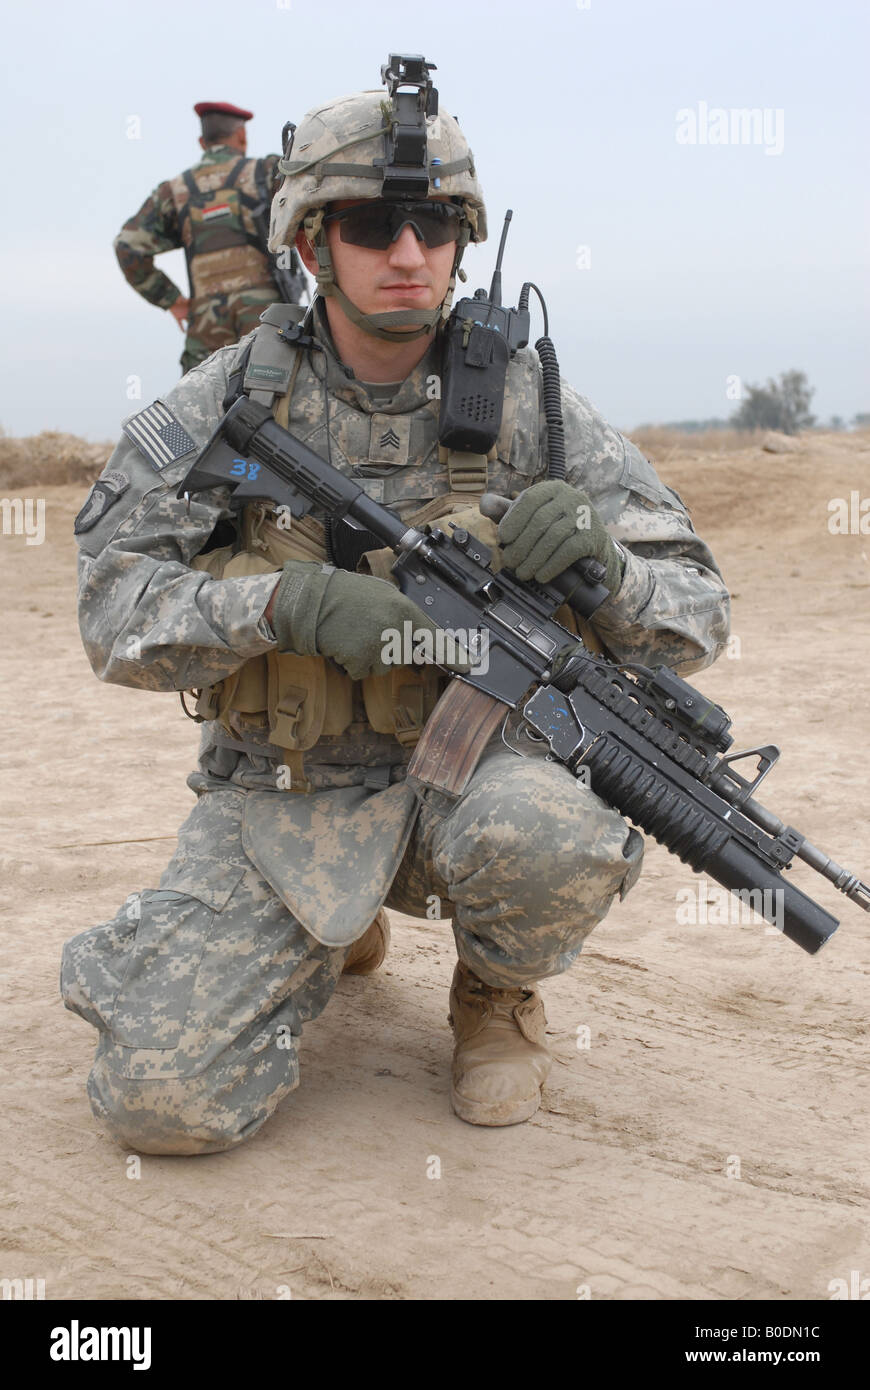 Soldier on a mission to clear insurgents from the Chaka Four region south of Baghdad Iraq on Jan 10 2008. Stock Photo